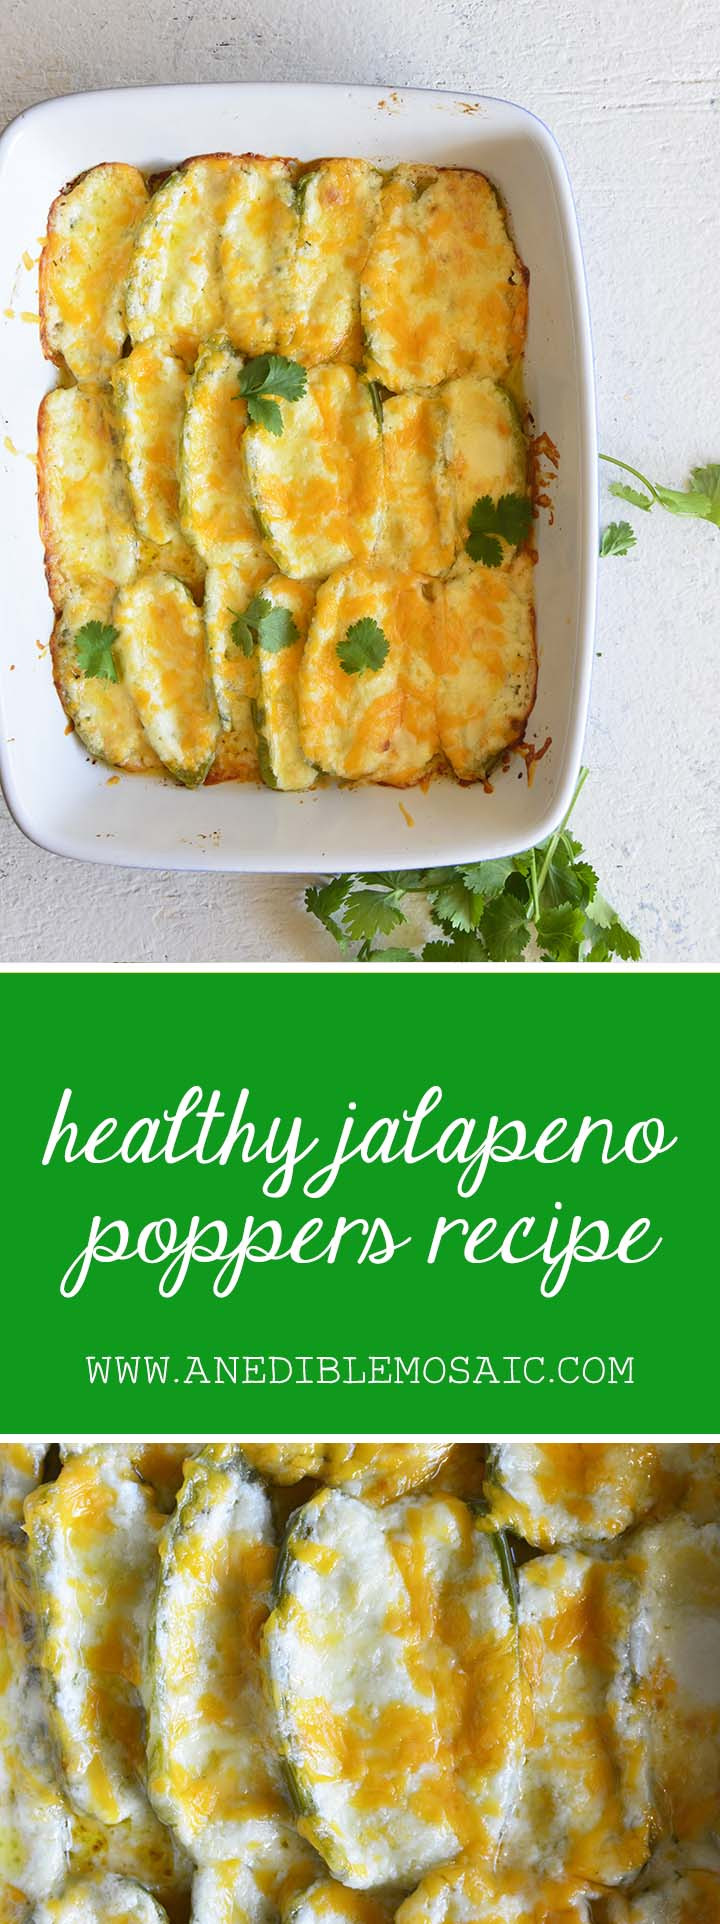 Healthy Jalapeno Poppers
 Easy Baked Healthy Jalapeno Poppers Recip An Edible Mosaic™